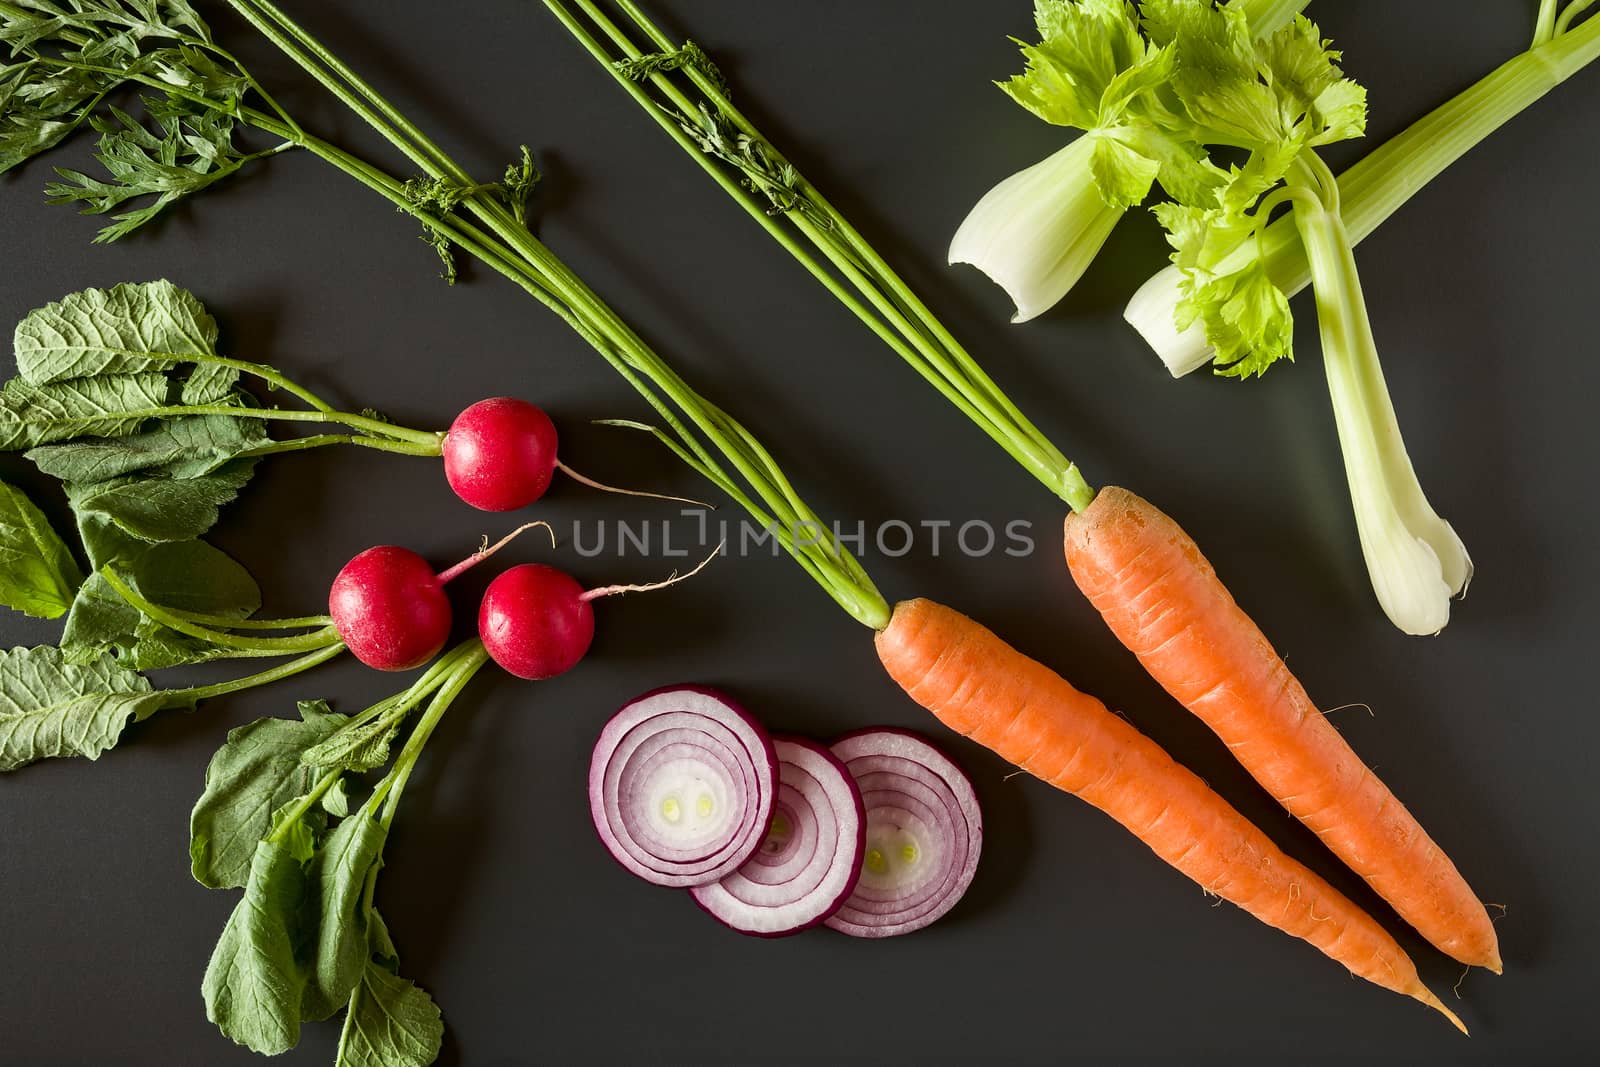 Fresh raw vegetables over a dark background seen from above